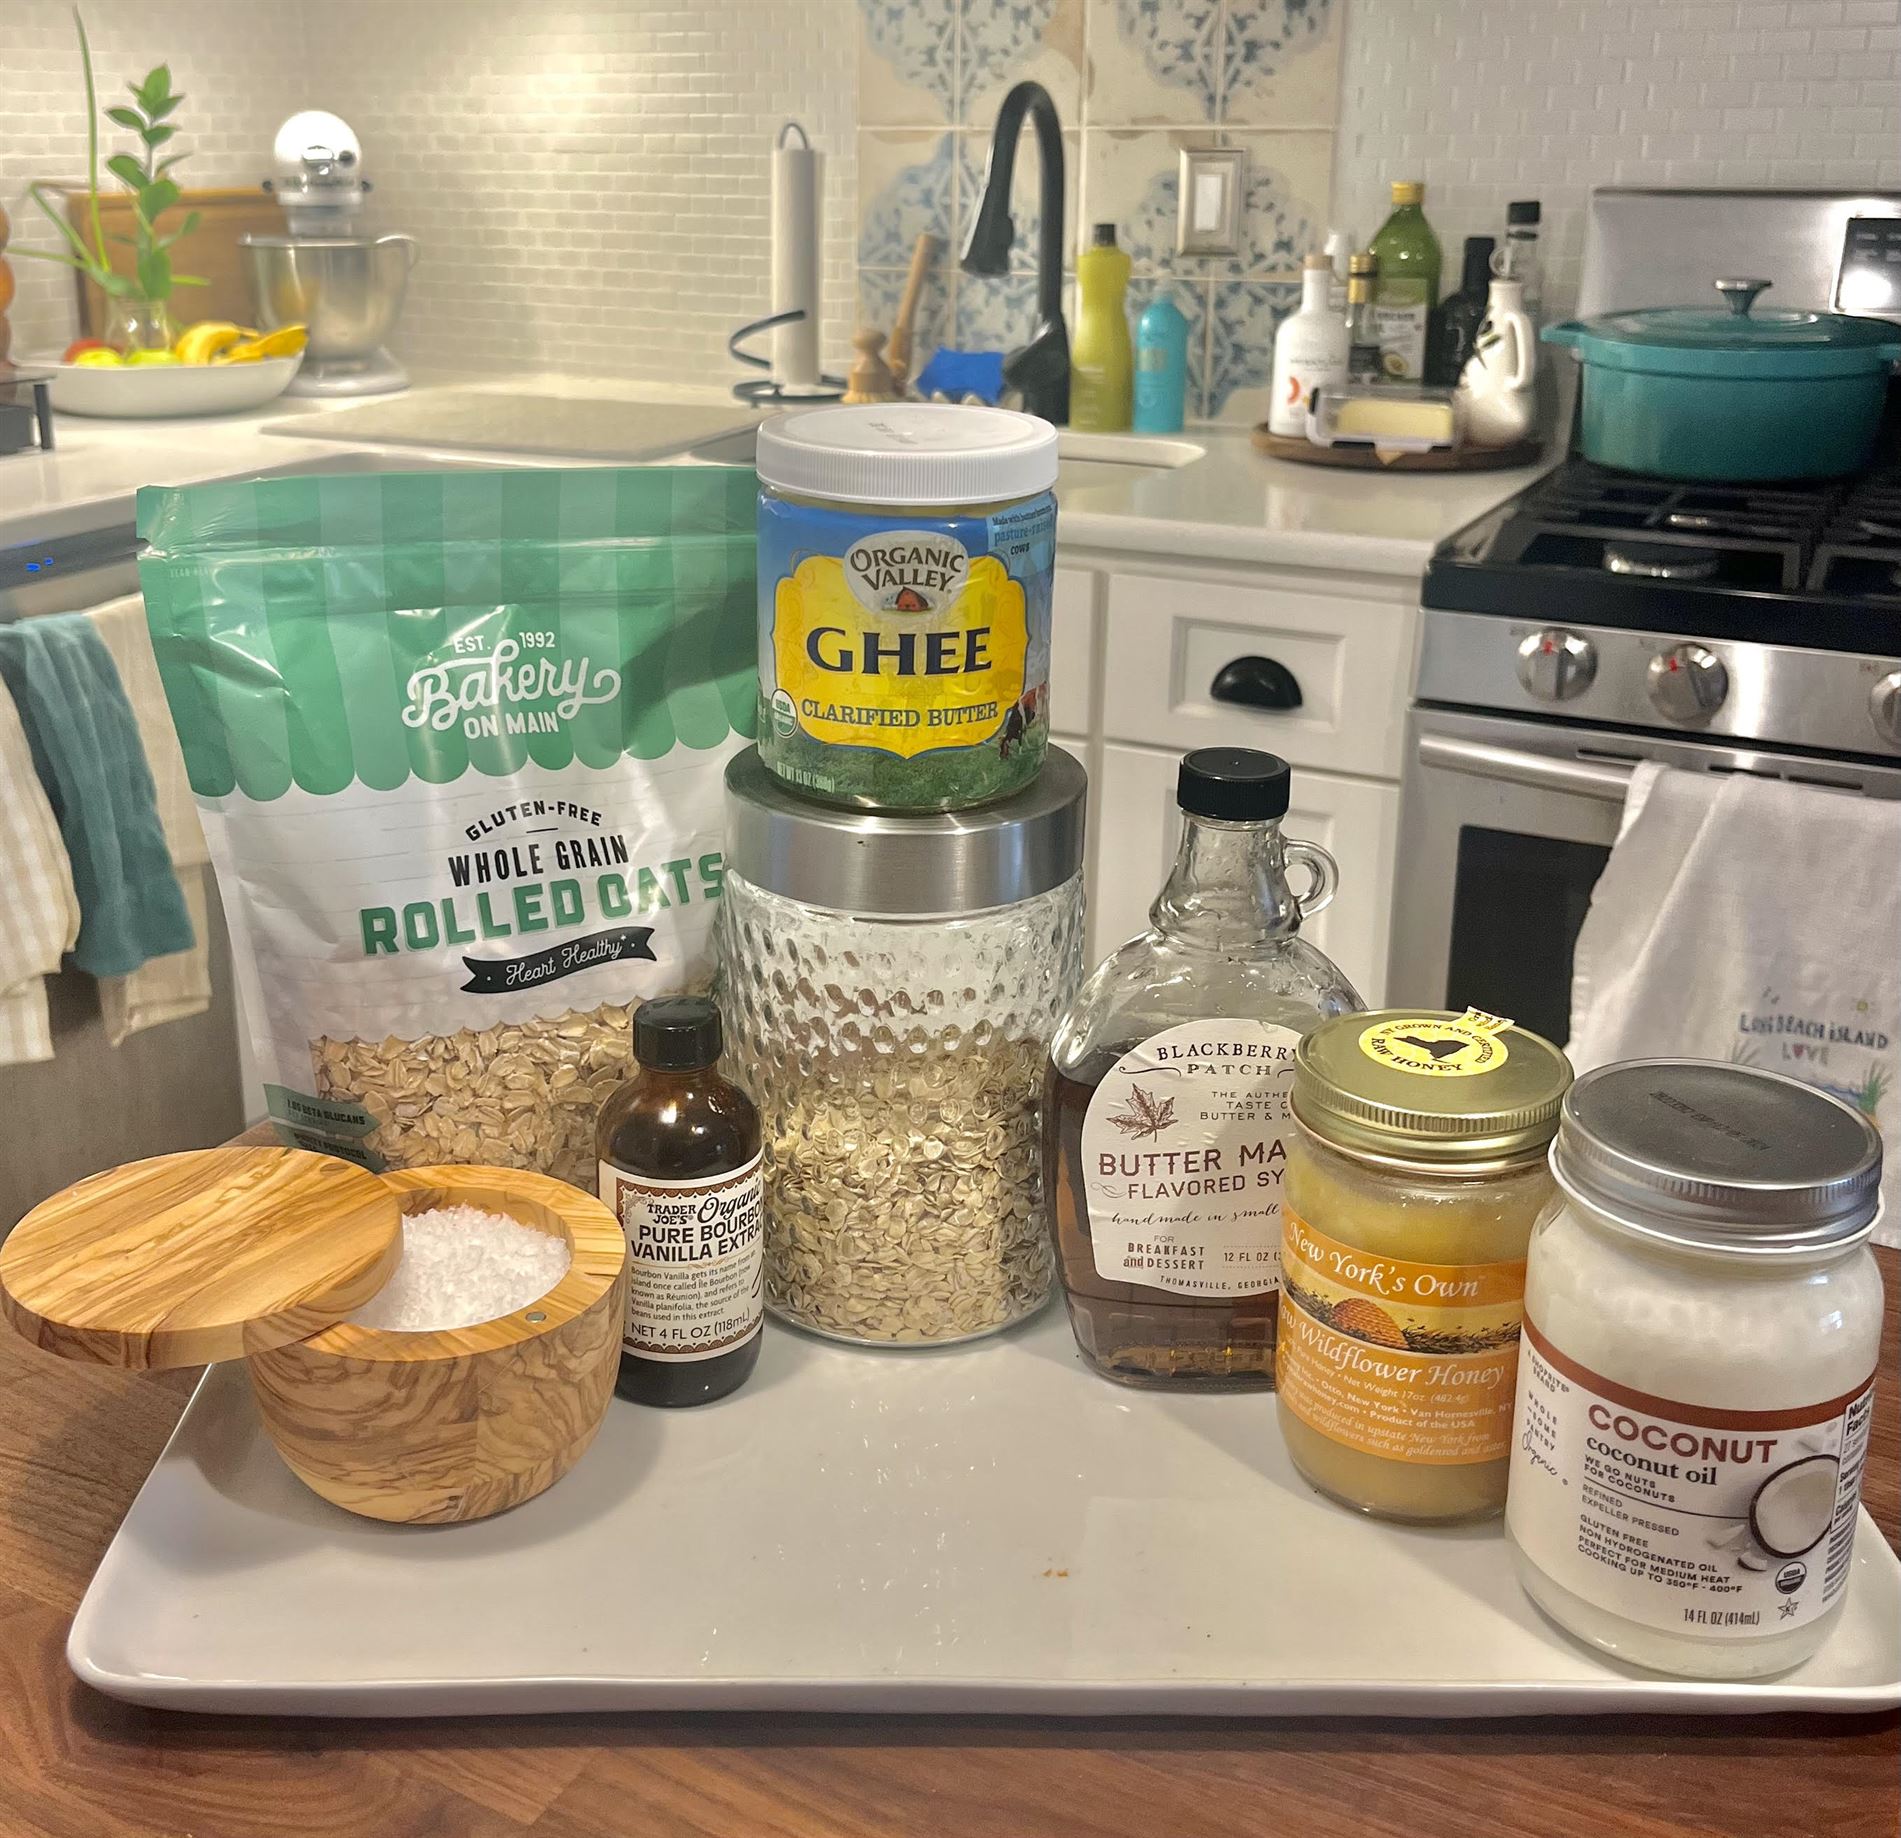 These are all the ingredients to make a wholesome batch of granola.
Courtney Lockwood | The Montclarion